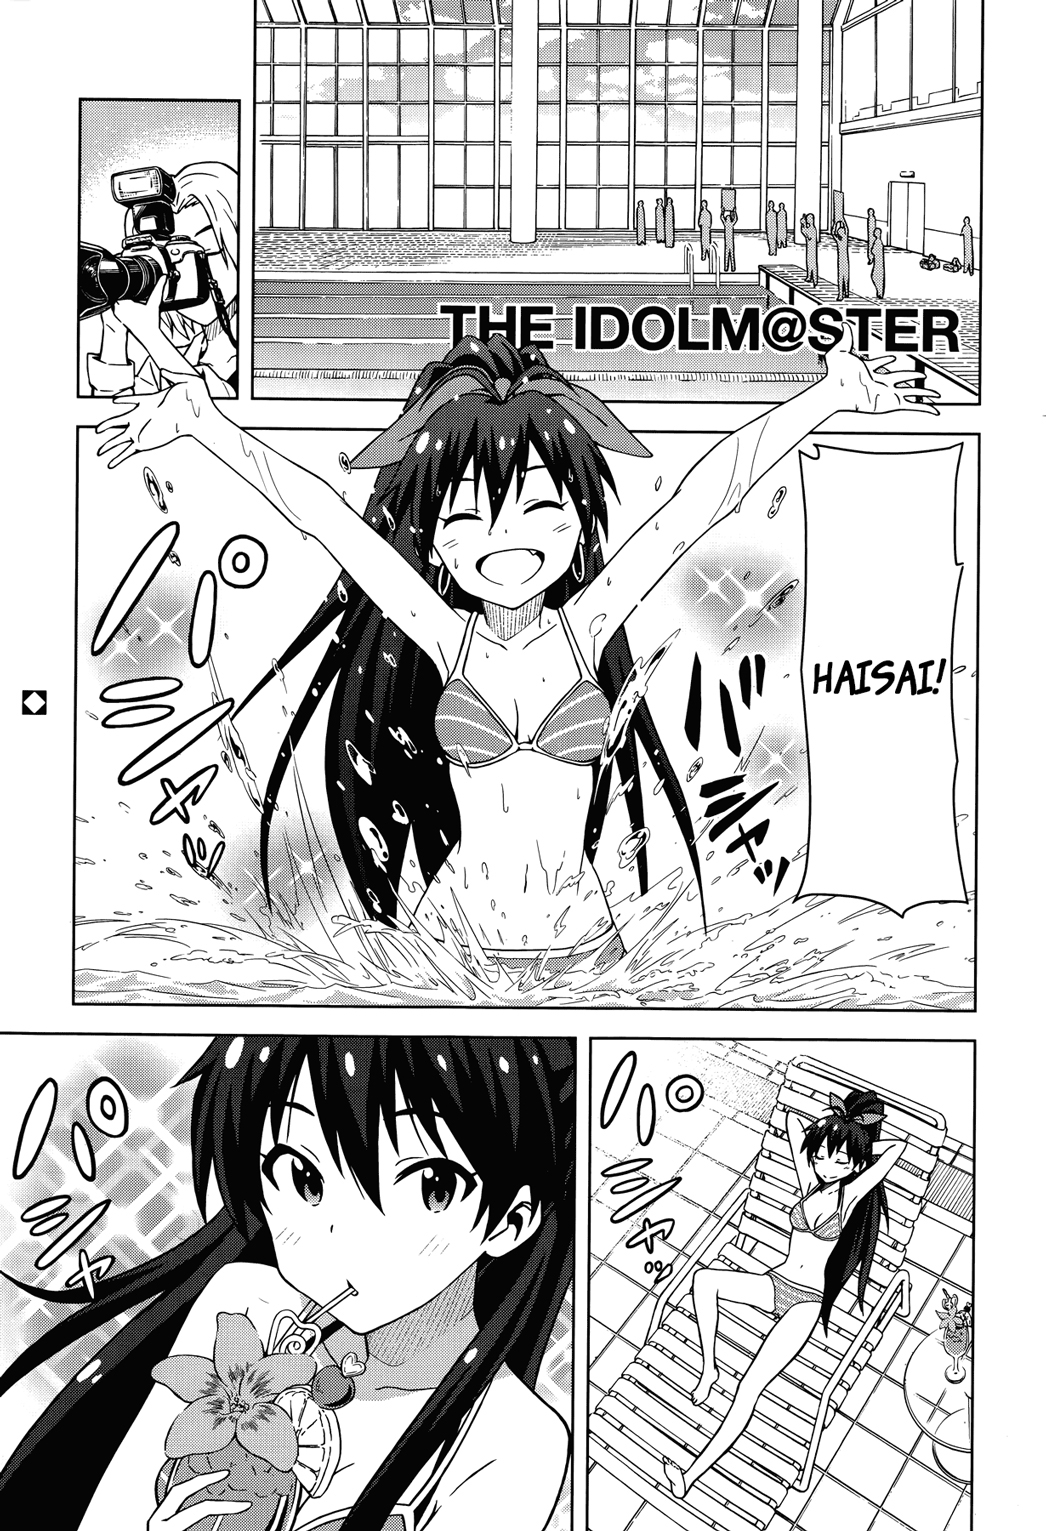 THE IDOLM@STER (Mana)